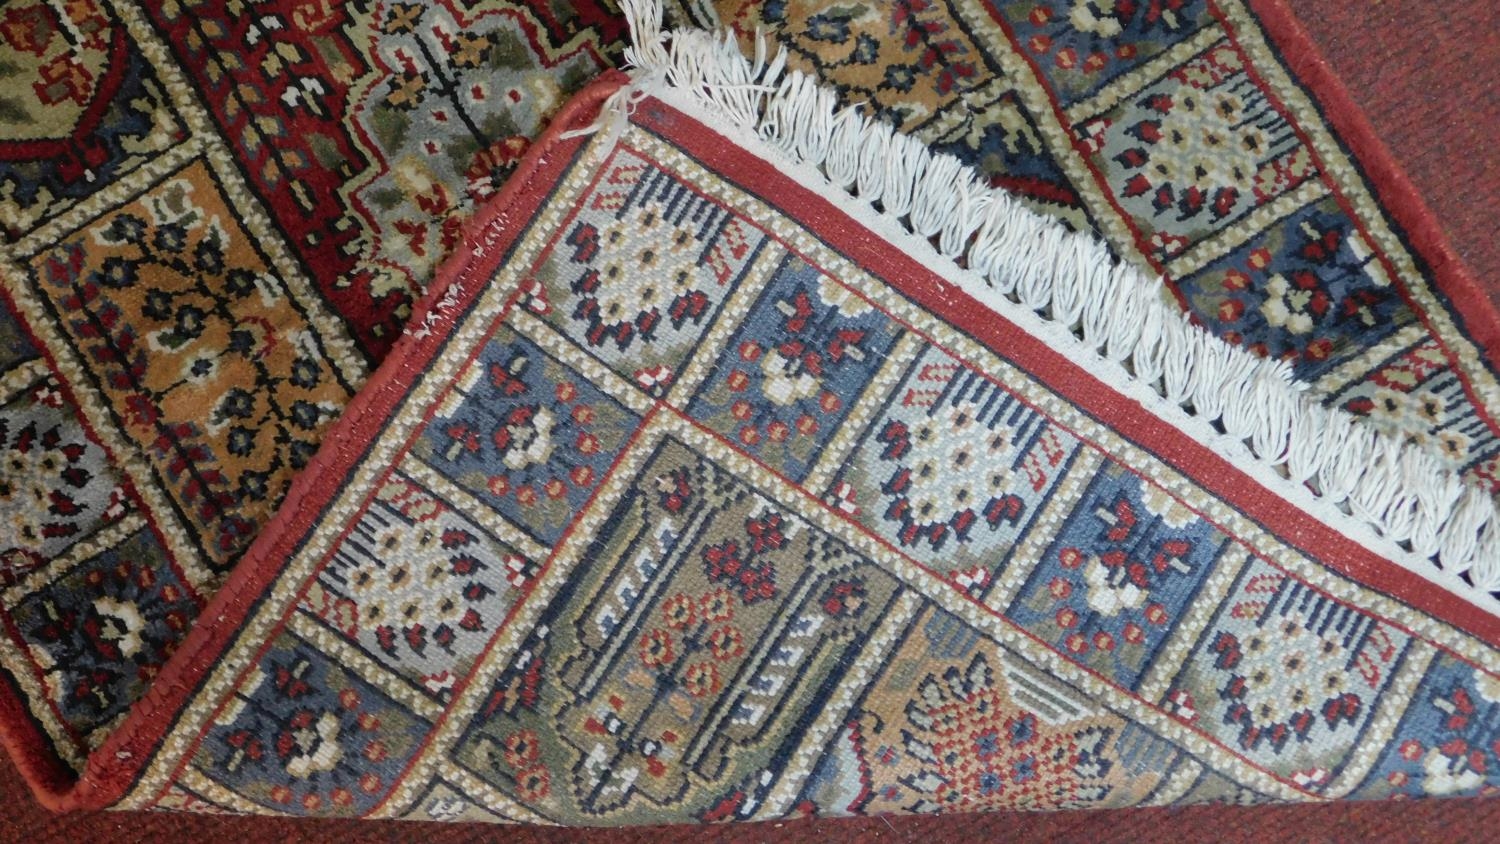 A Bachtiar rug with central pole medallion on burgundy ground within floral panels. 62x112cm - Image 4 of 4